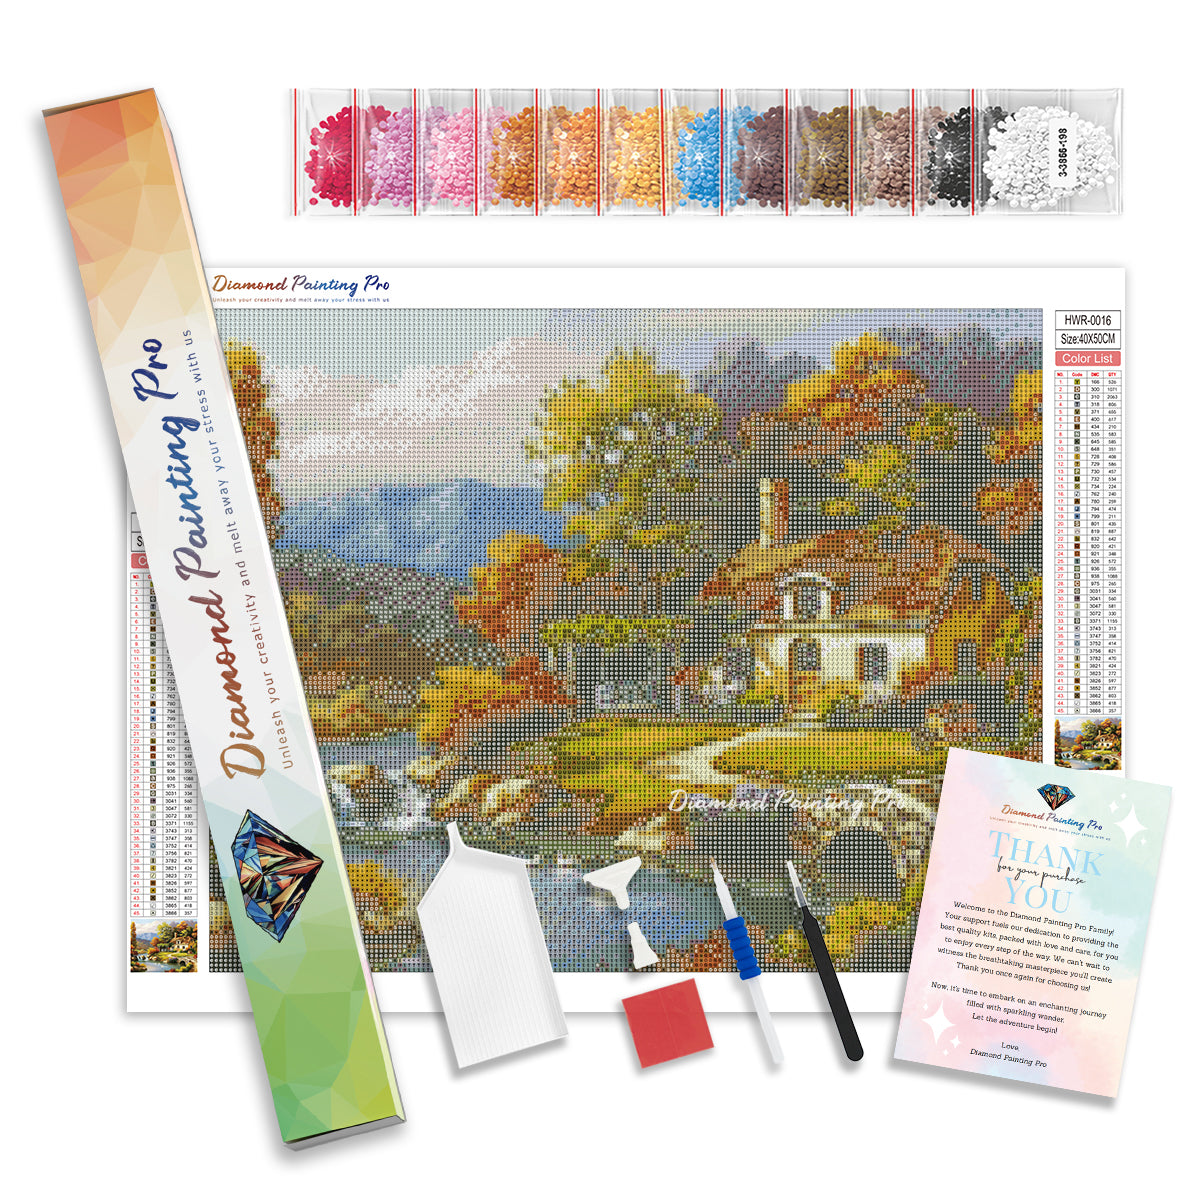 Autumn Cottage by the River | Diamond Painting